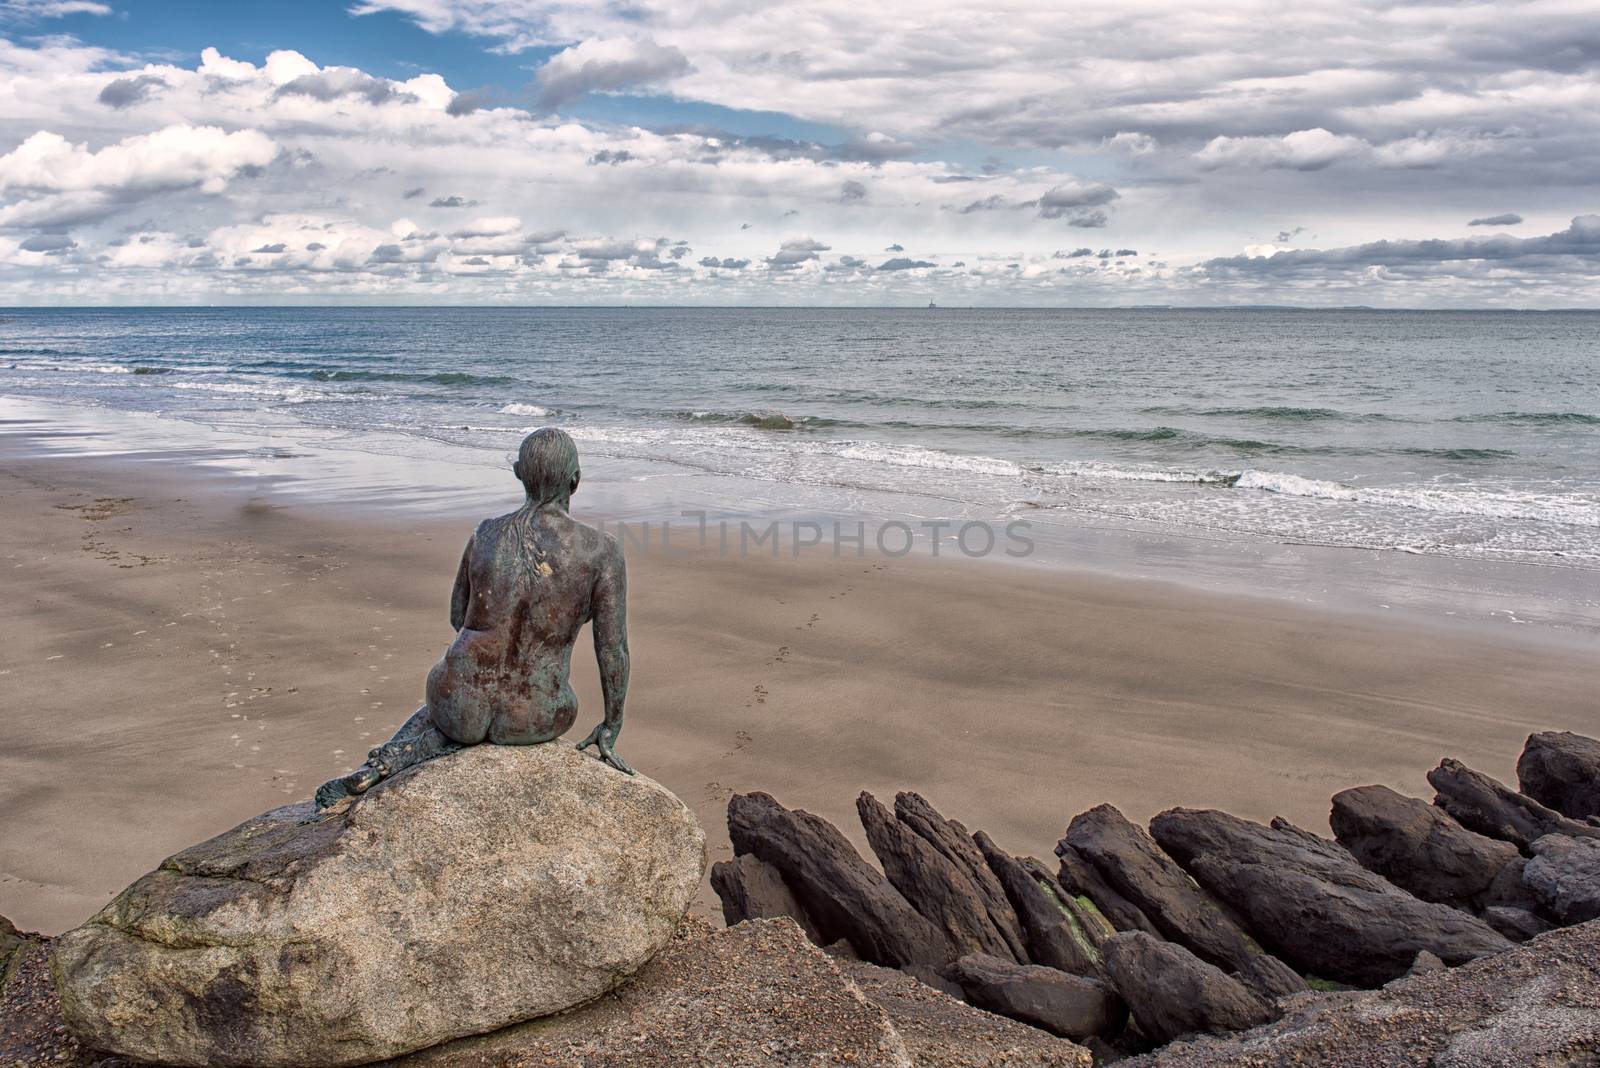 A bronze statue sitting on rocks in Folkestone overlooking a deserted beach and looking out to sea